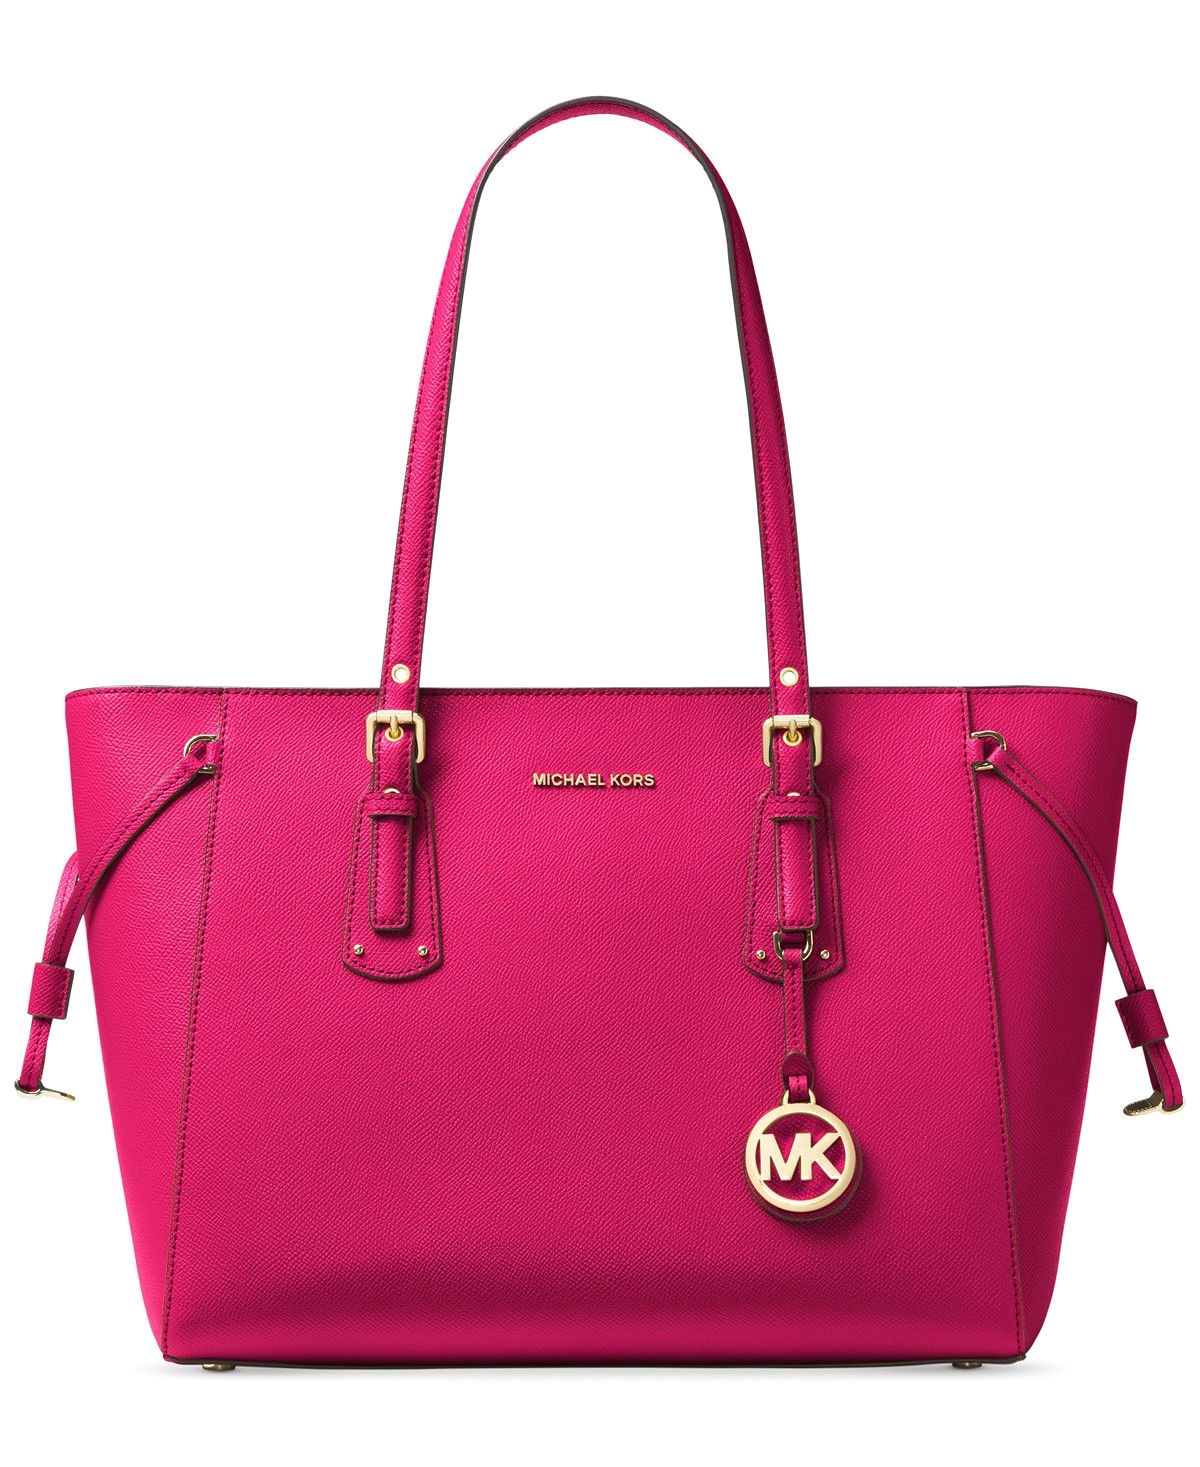 169 80 michael kors voyager medium multifunction leather tote ultra pink new nwt 278 a¤